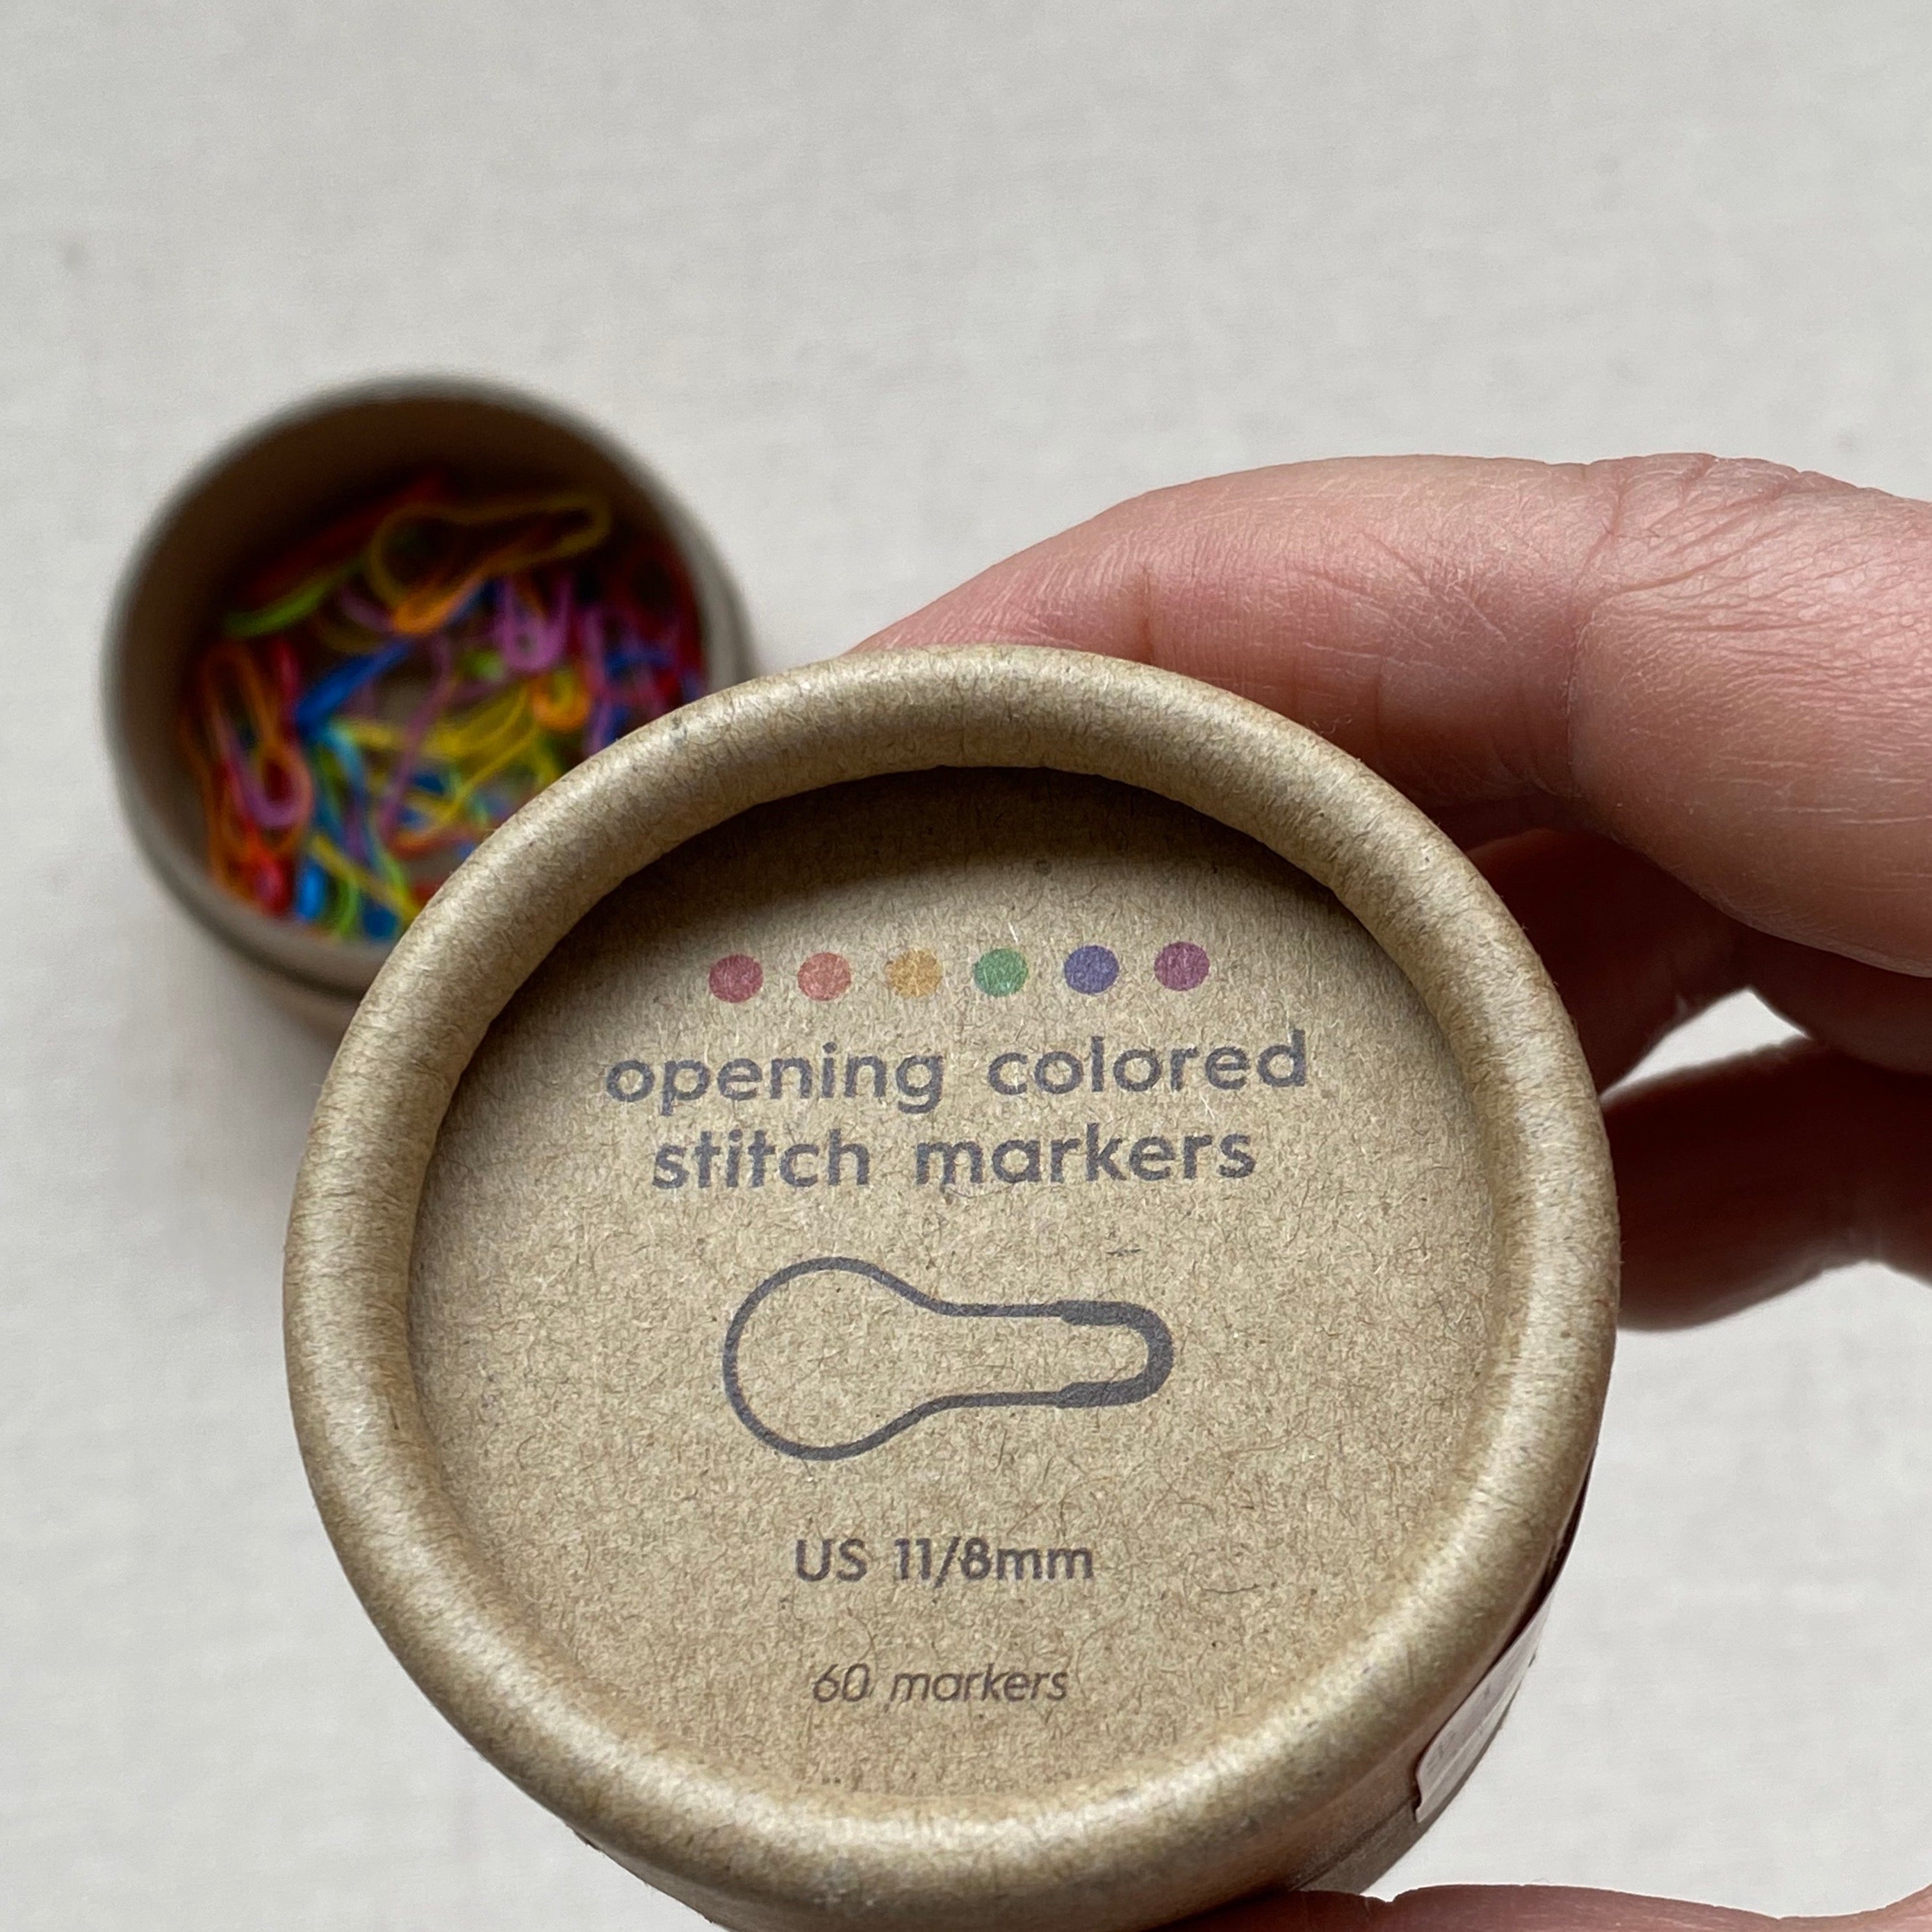 Coloured Opening Stitch Markers by Cocoknits